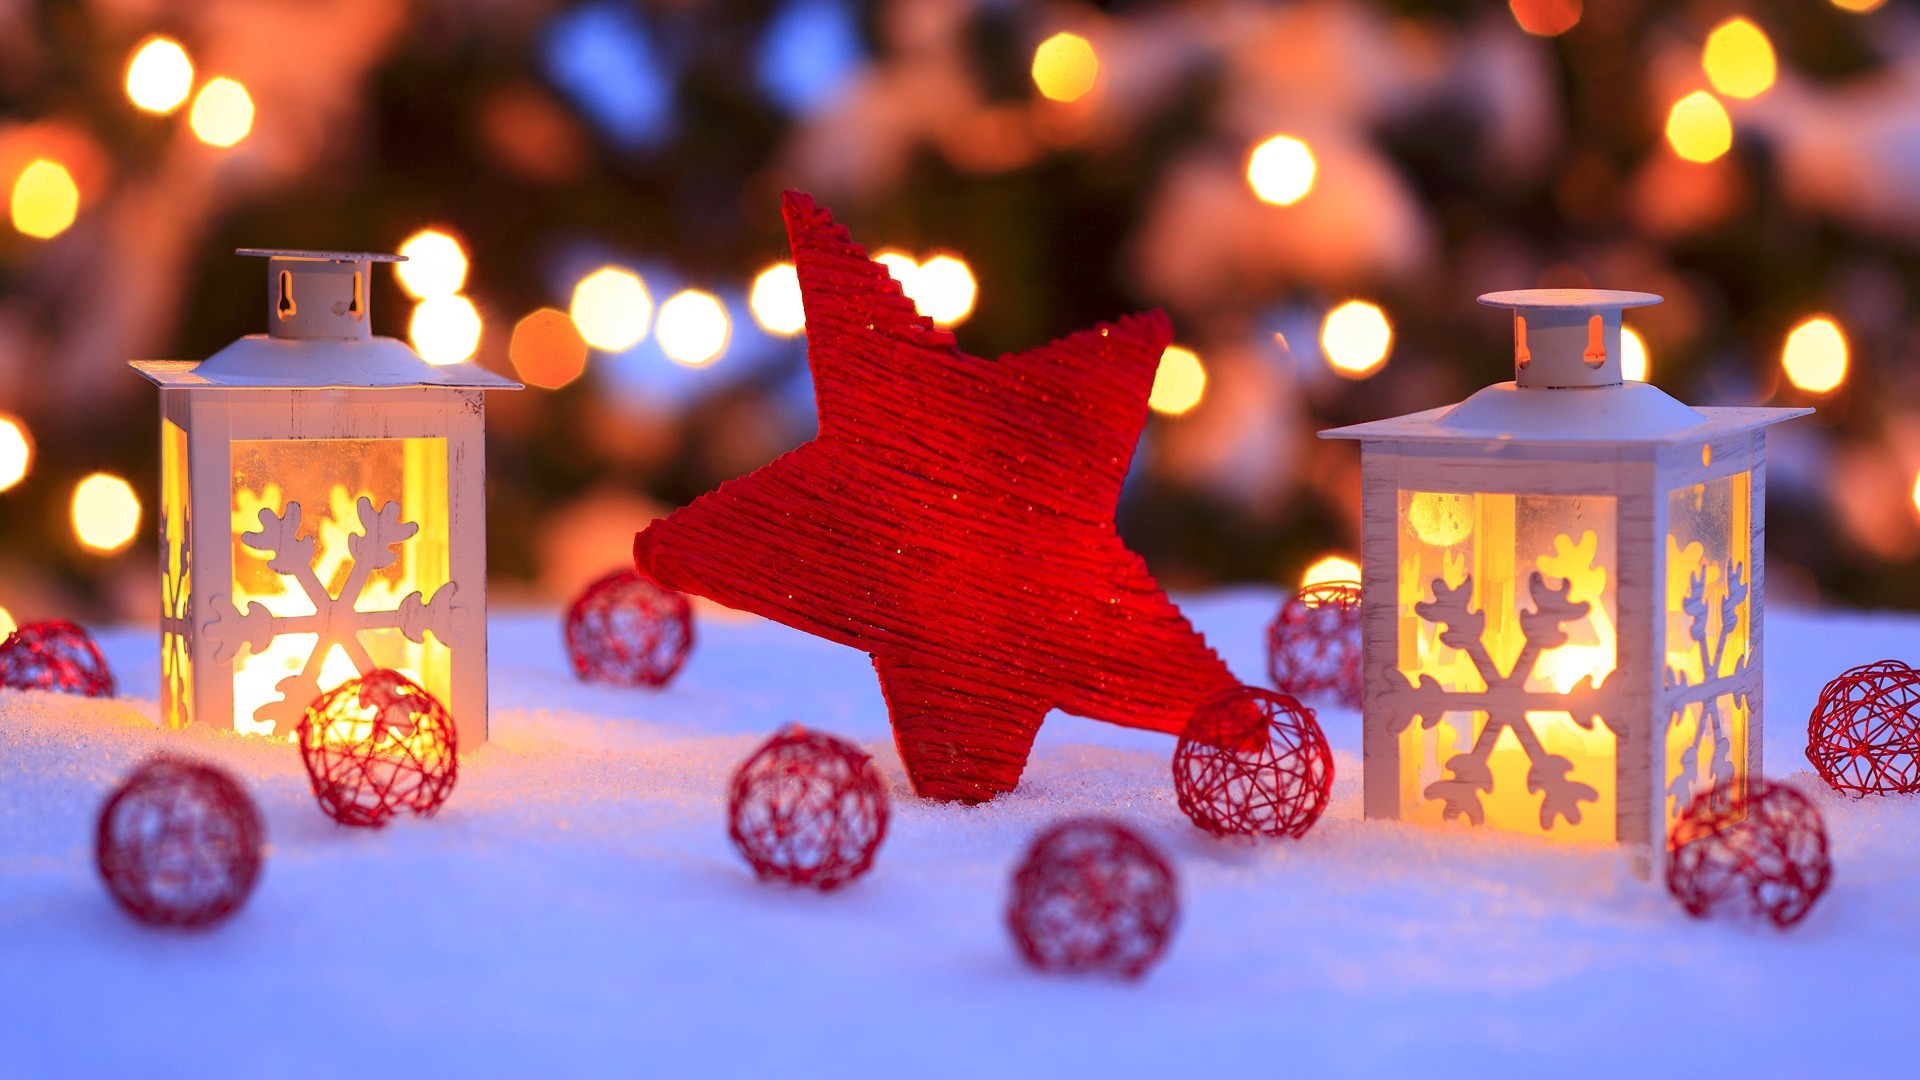 1920x1080 Christmas Backgrounds Pictures Download.